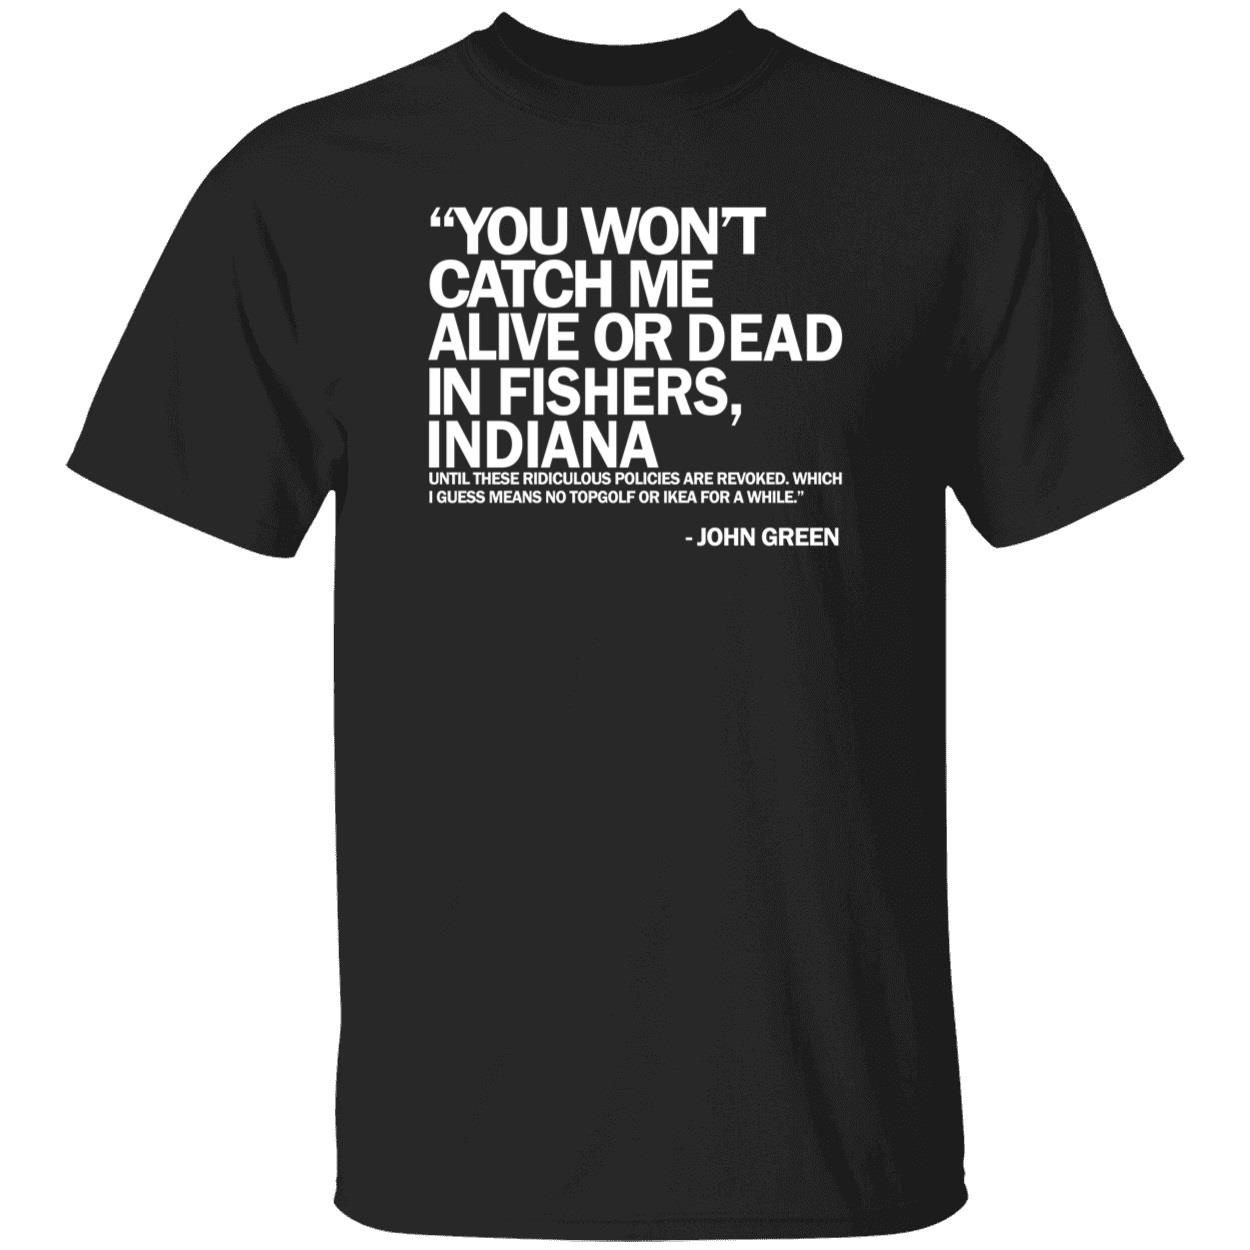 You Won’t Catch Me Alive Or Dead In Fishers, Indiana Shirt